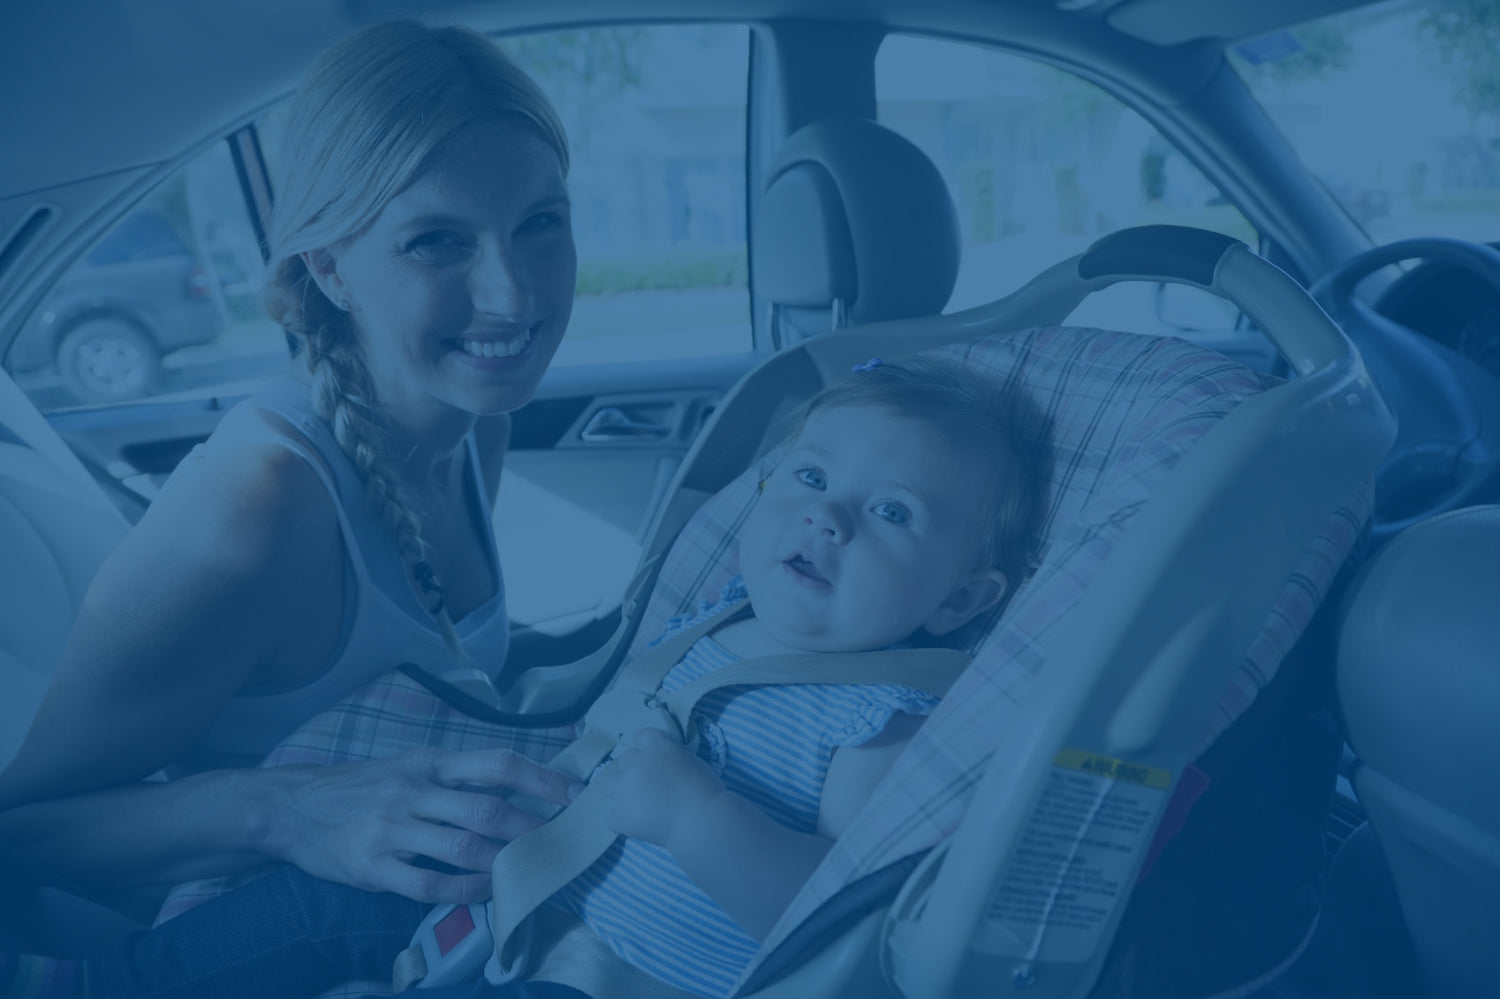 Mom sitting next to baby in carseat